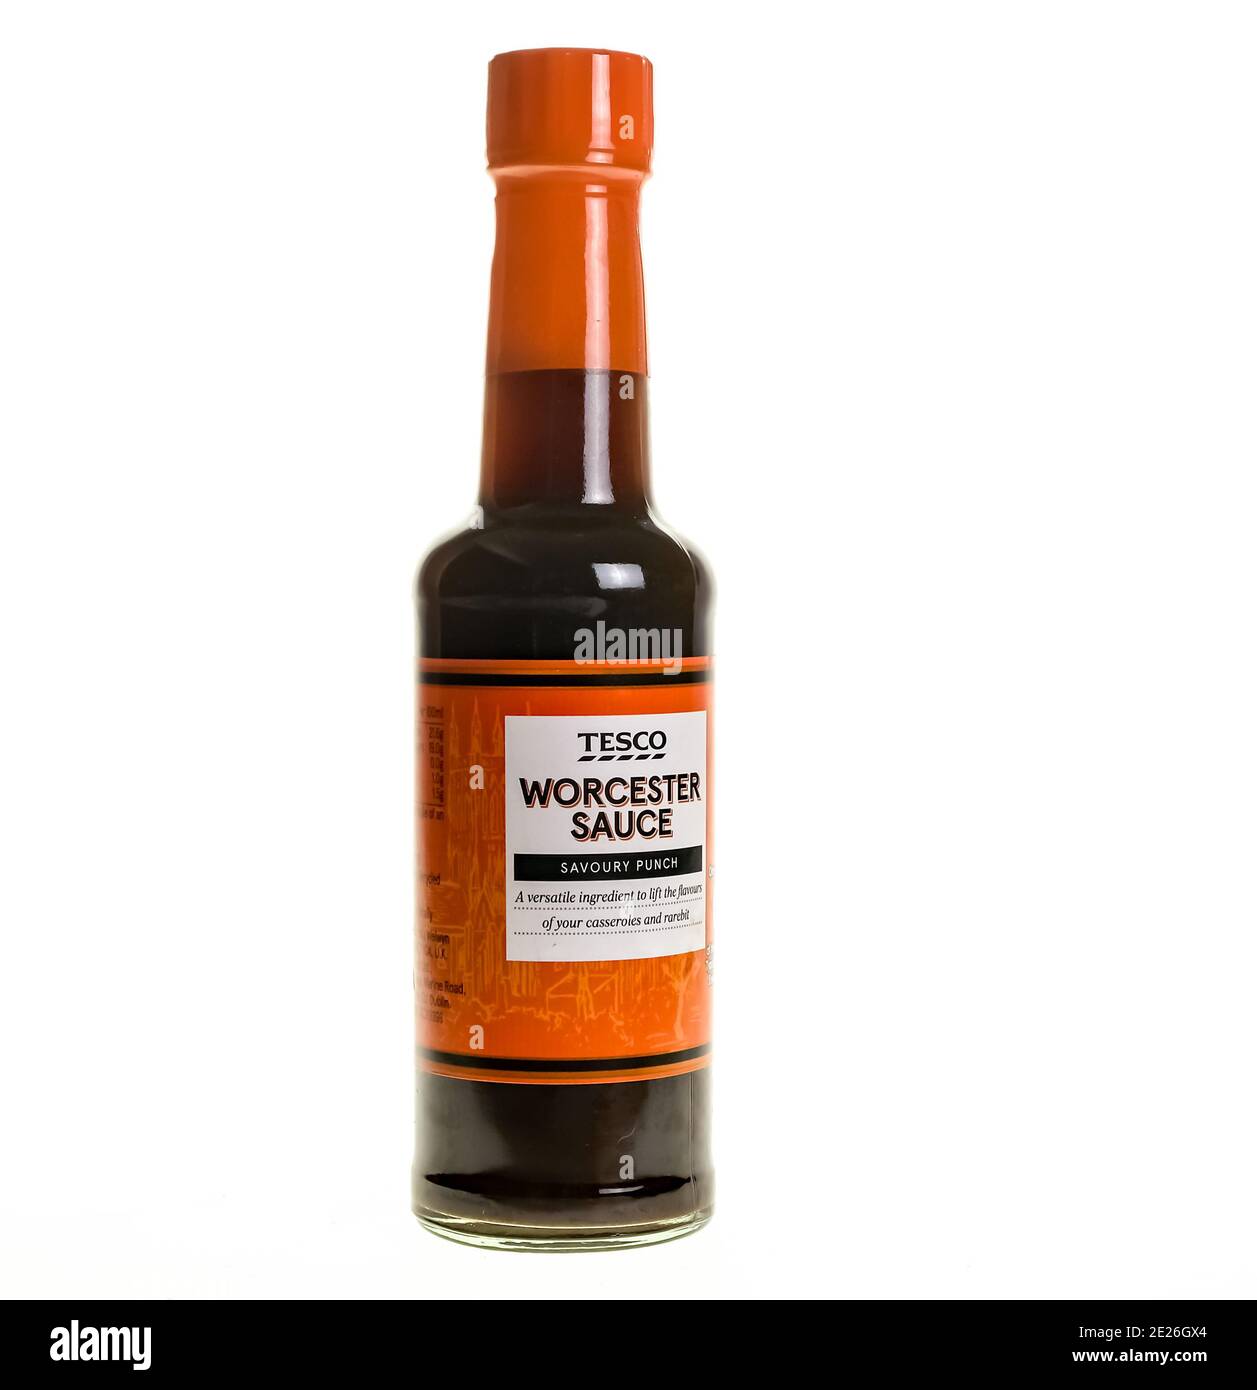 Norwich, Norfolk, UK – December 20 2020. An illustrative photo of a glass bottle of Tesco branded Worcester sauce on a plain white background Stock Photo